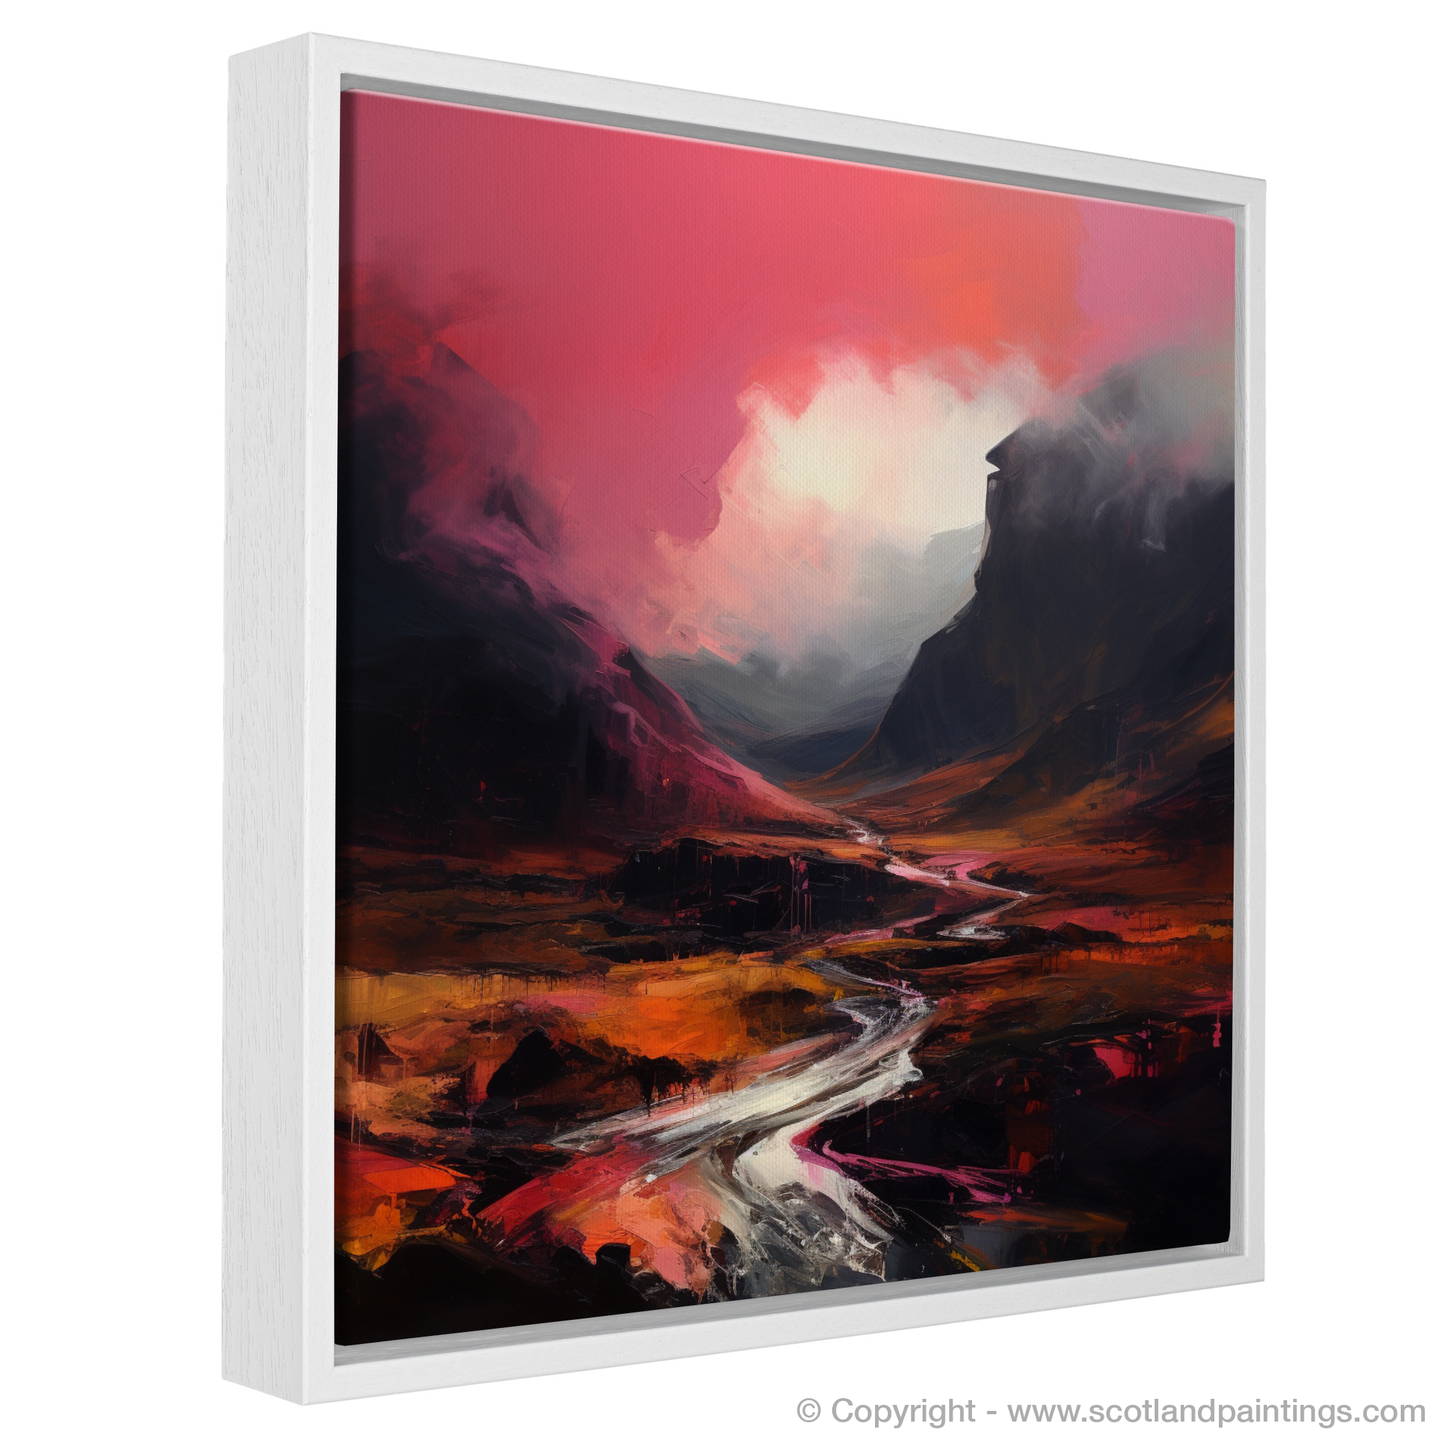 Painting and Art Print of Crimson clouds over valley in Glencoe entitled "Crimson Skies over Glencoe Valley: An Expressionist Ode to Highland Drama".